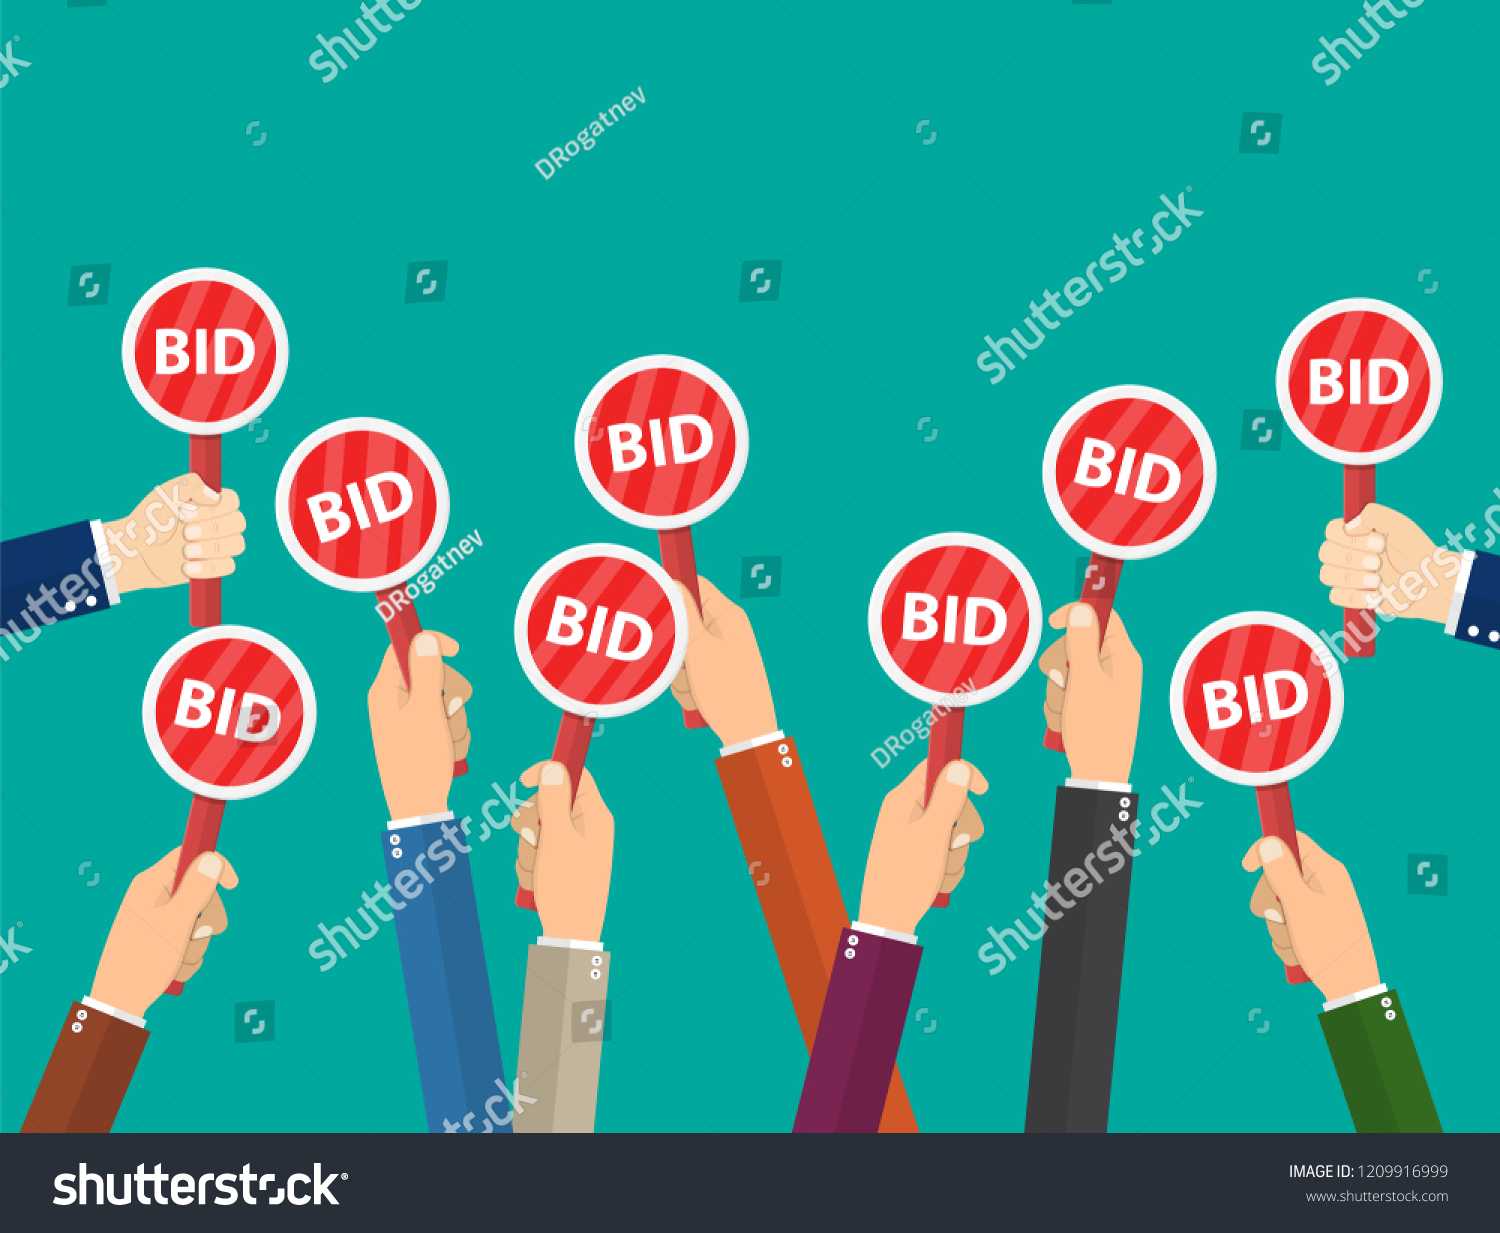 Hand Hold Paddle Bid Auction Meeting Stock Image | Download Now For Auction Bid Cards Template